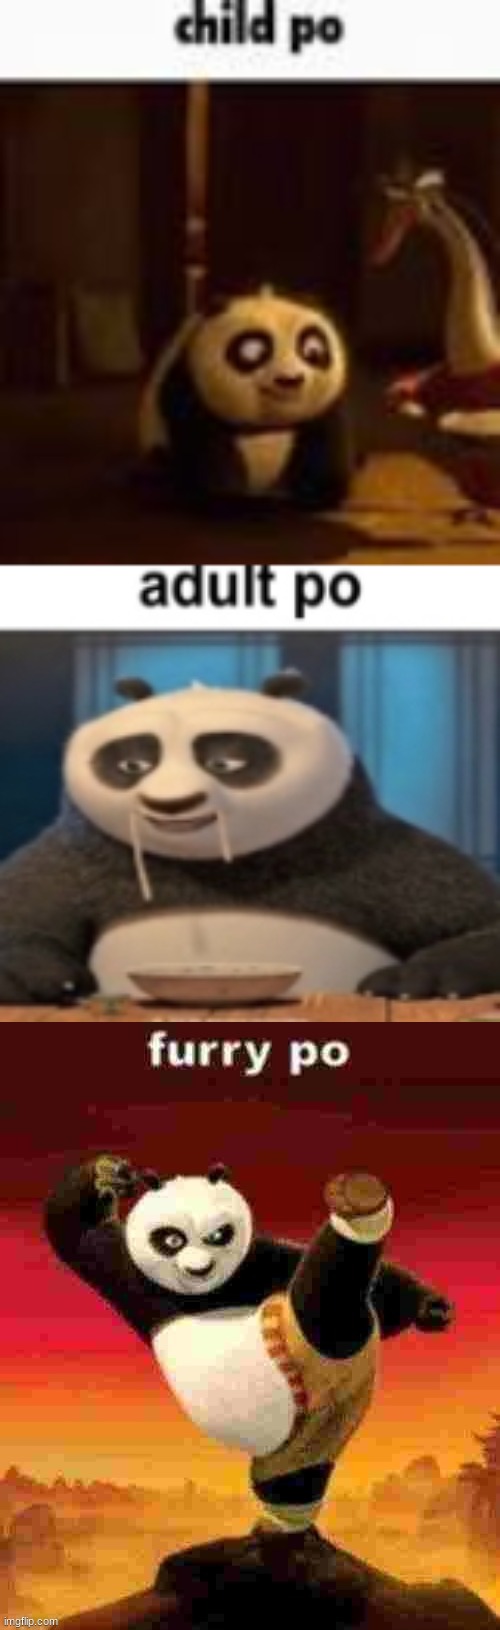 image tagged in child po,adult po,furry po | made w/ Imgflip meme maker